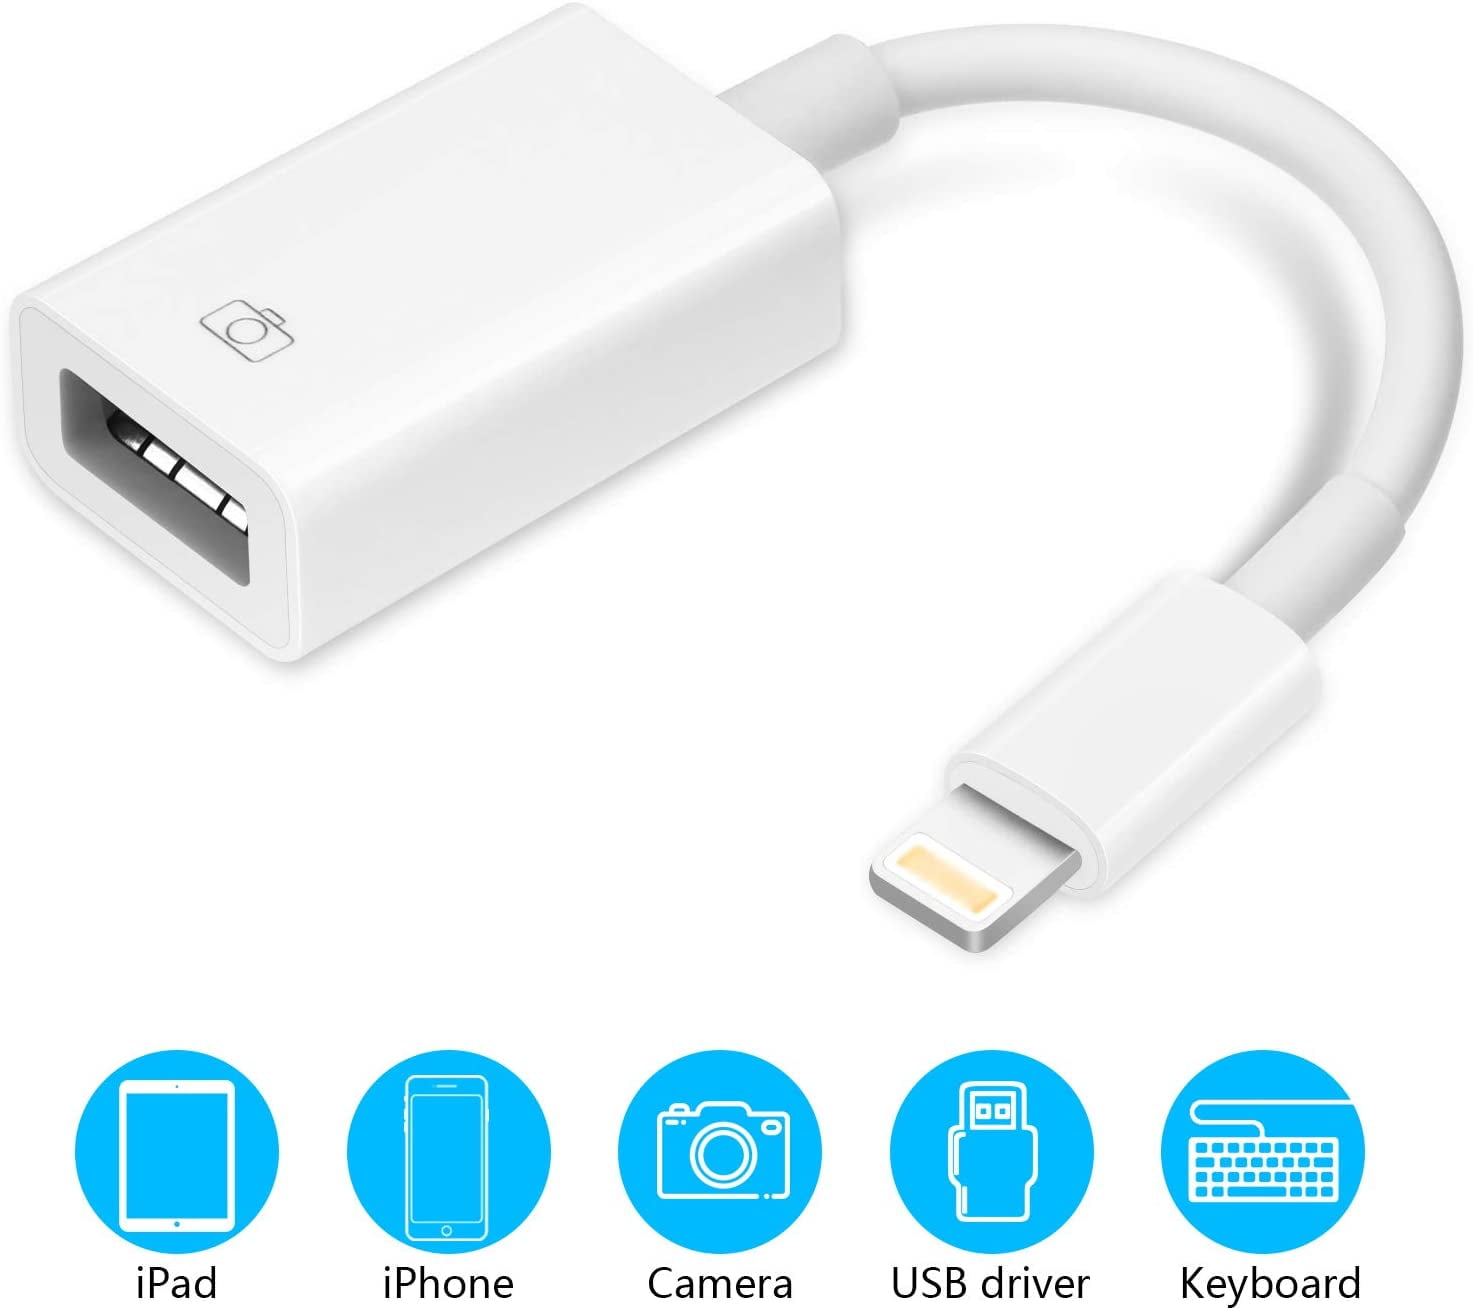 Apple Lightning to USB Camera Adapter USB 3.0 OTG Cable Adapter Compatible  with iPhone/iPad,USB Female Supports Connect Card Reader,U  Disk,Keyboard,Mouse,USB Flash Drive-Plug&Play 